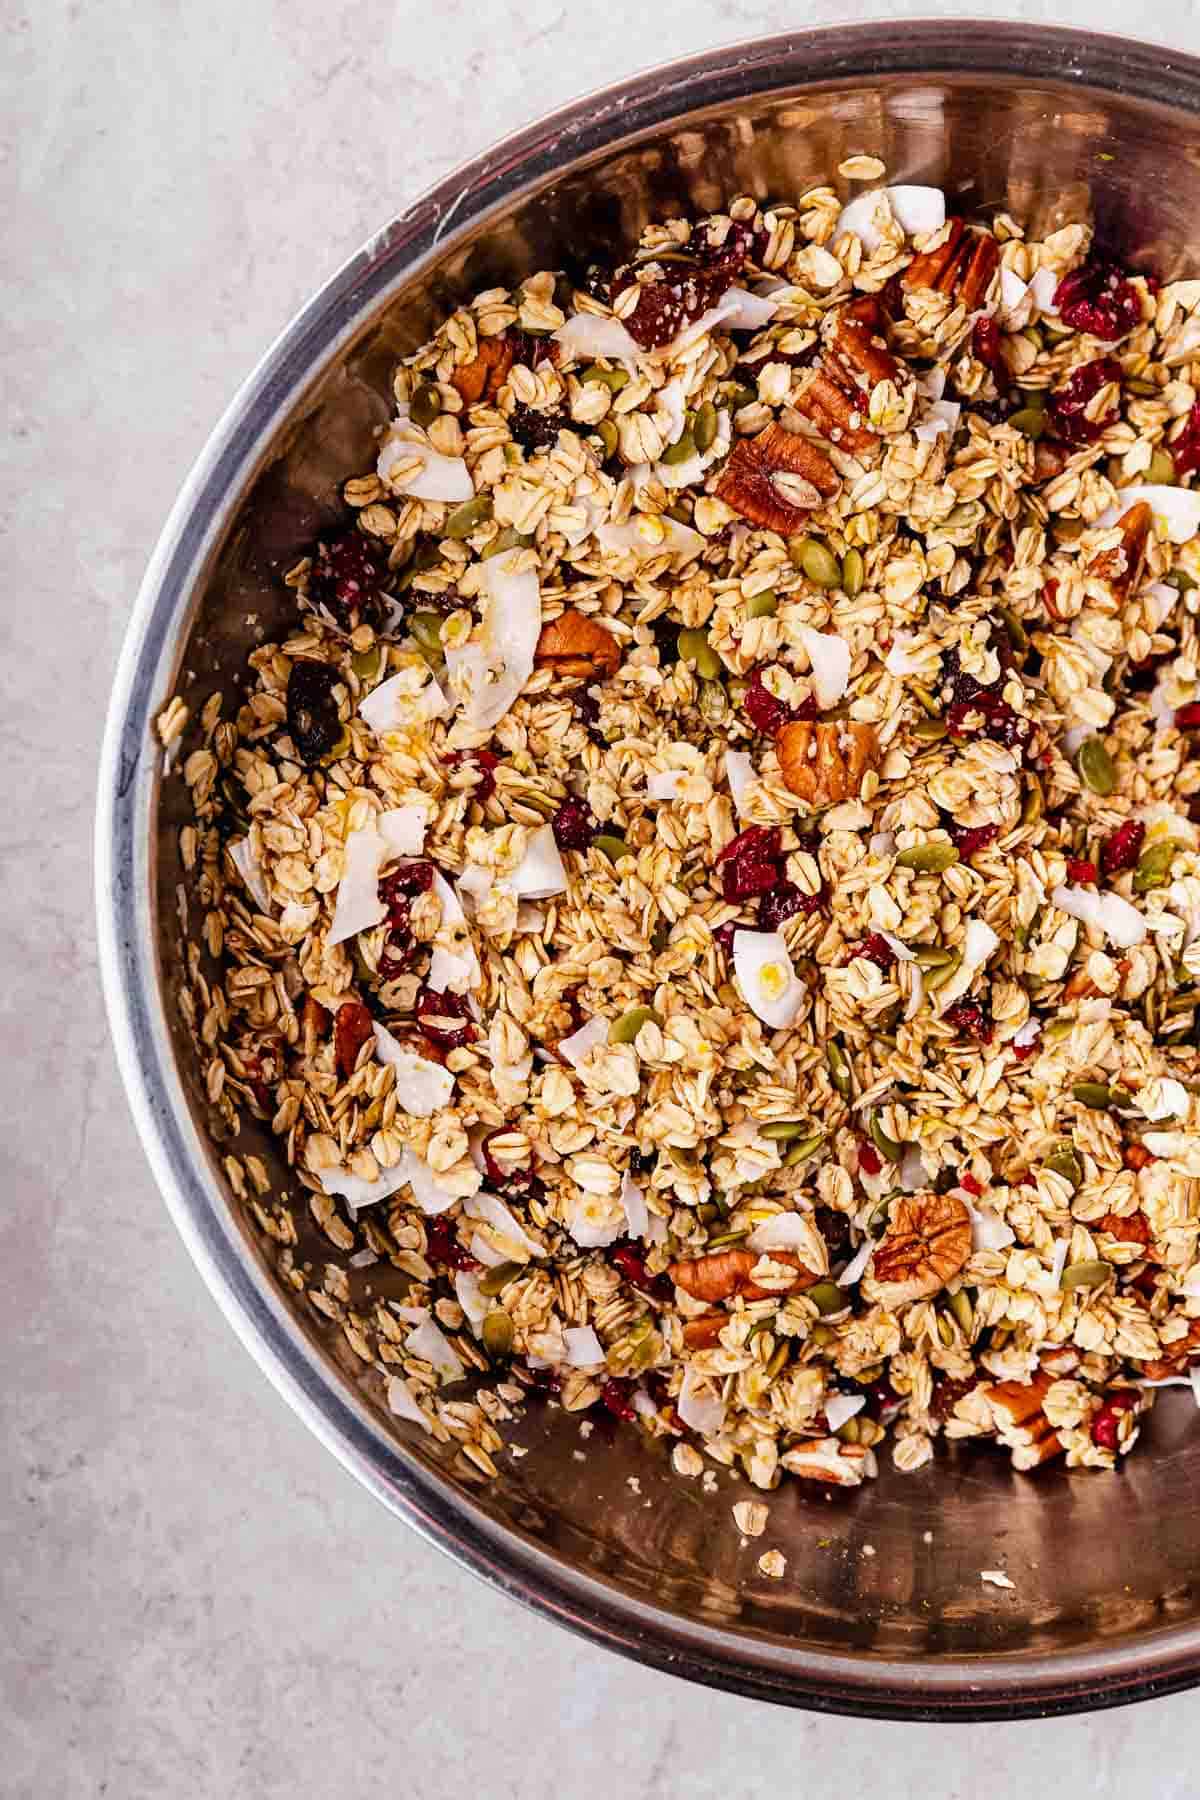 A large mixing bowl filled with raw oats and other ingredients to make orange pecan granola.